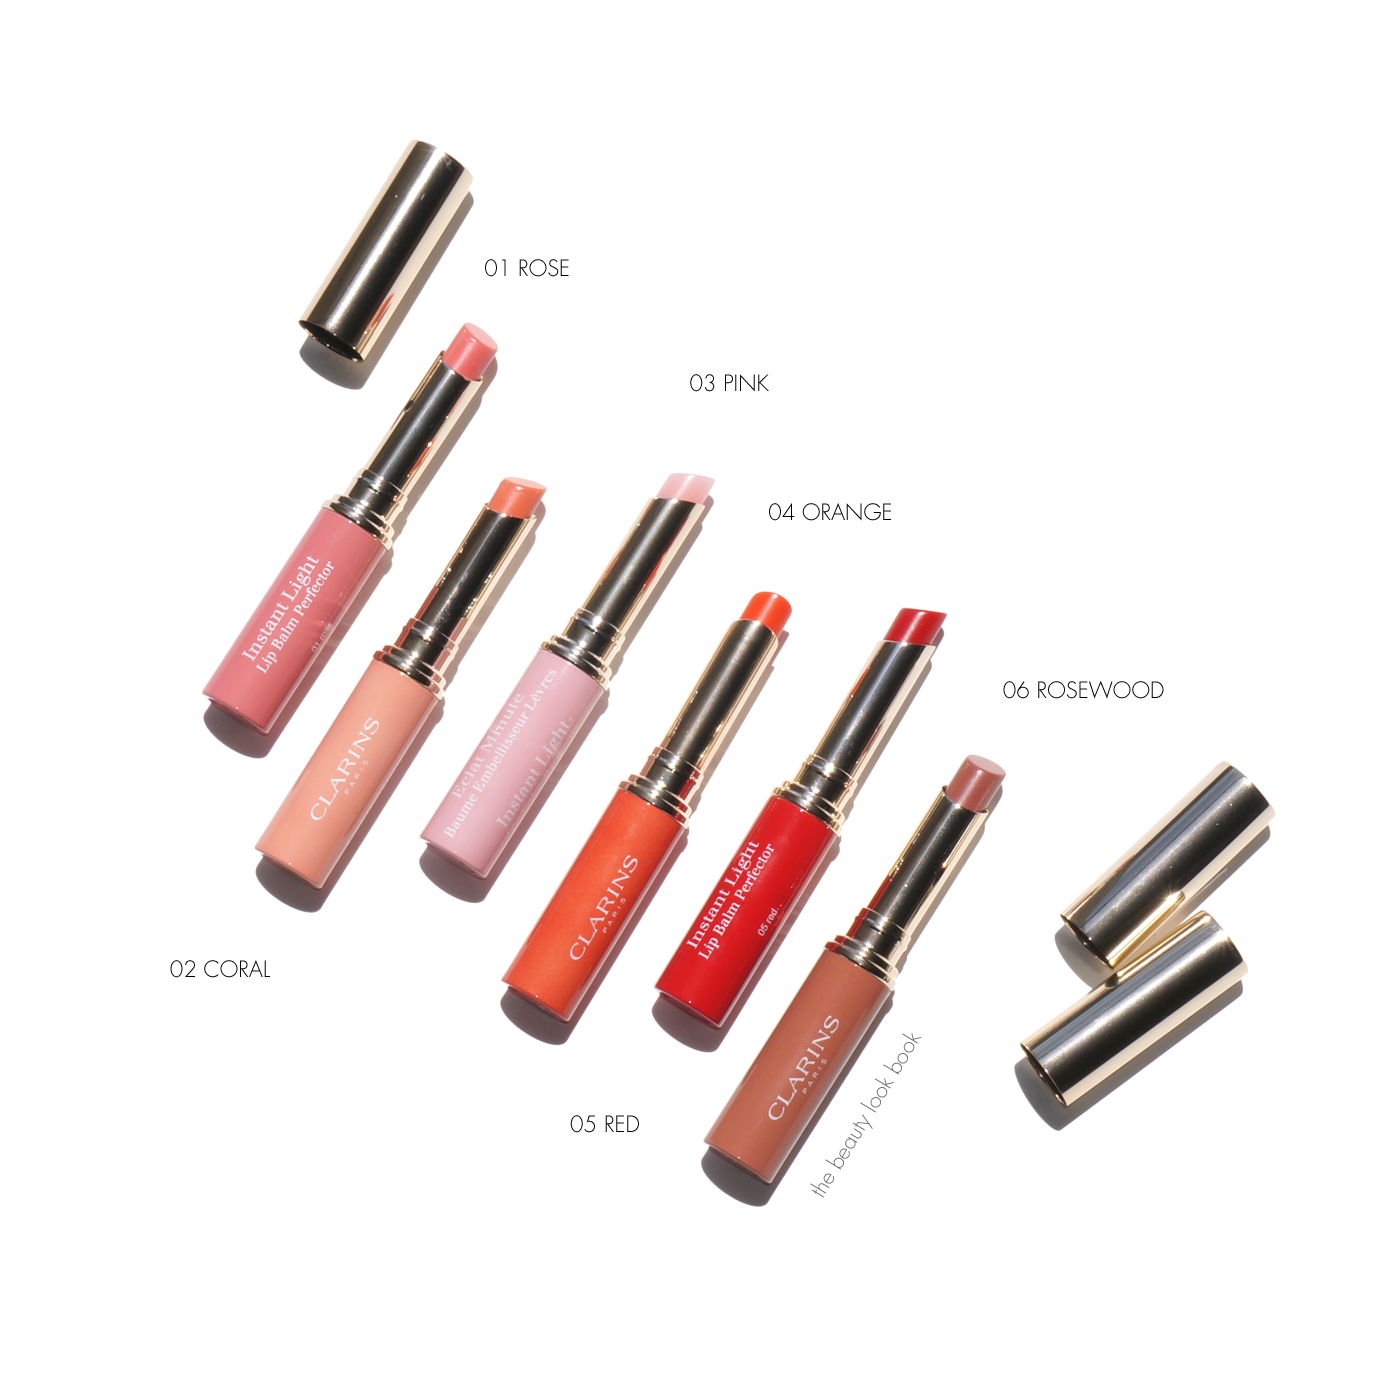 Clarins Light Balm Perfectors The Beauty Book